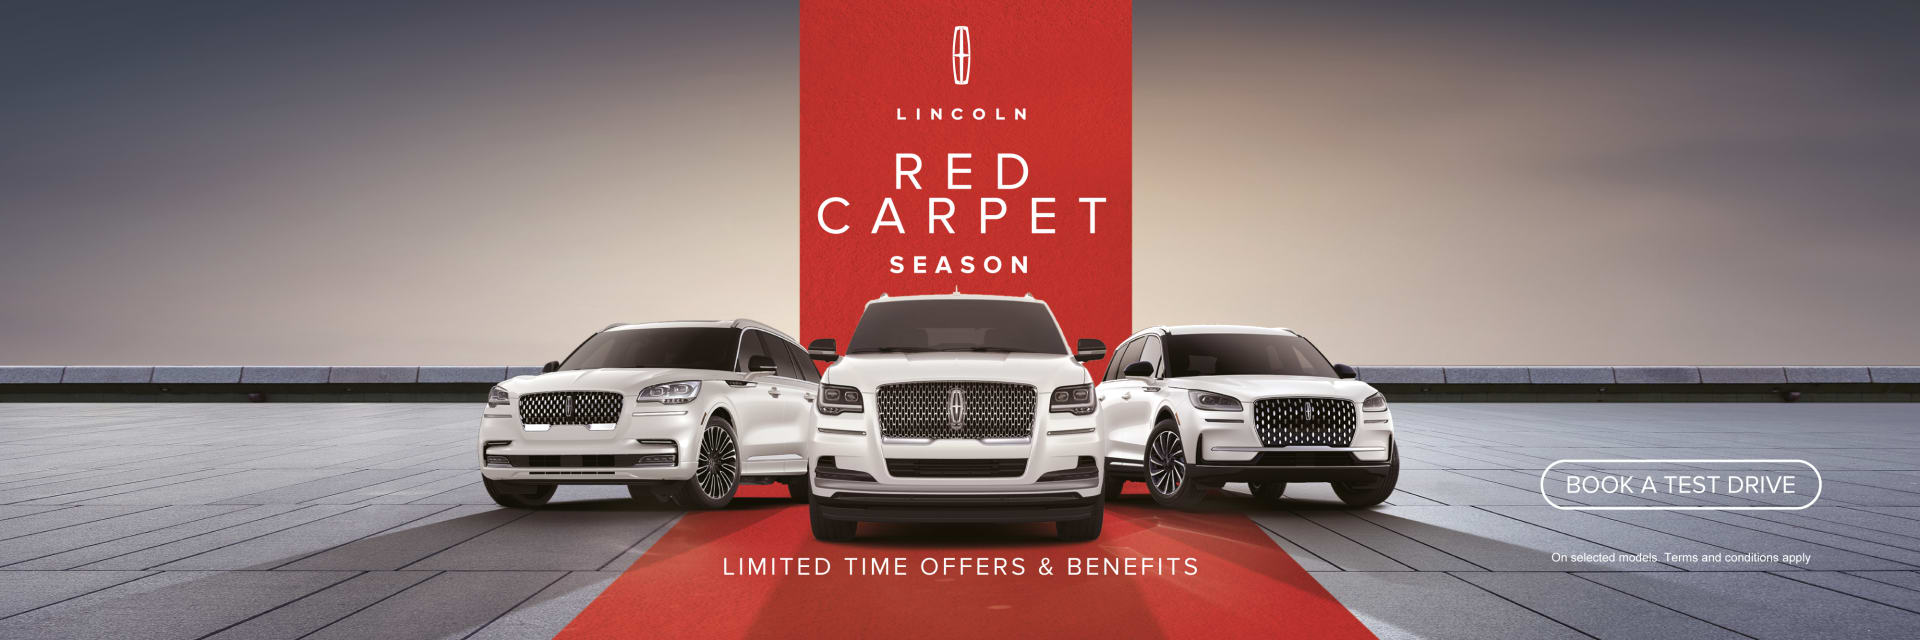 Lincoln Red Carpet Offers